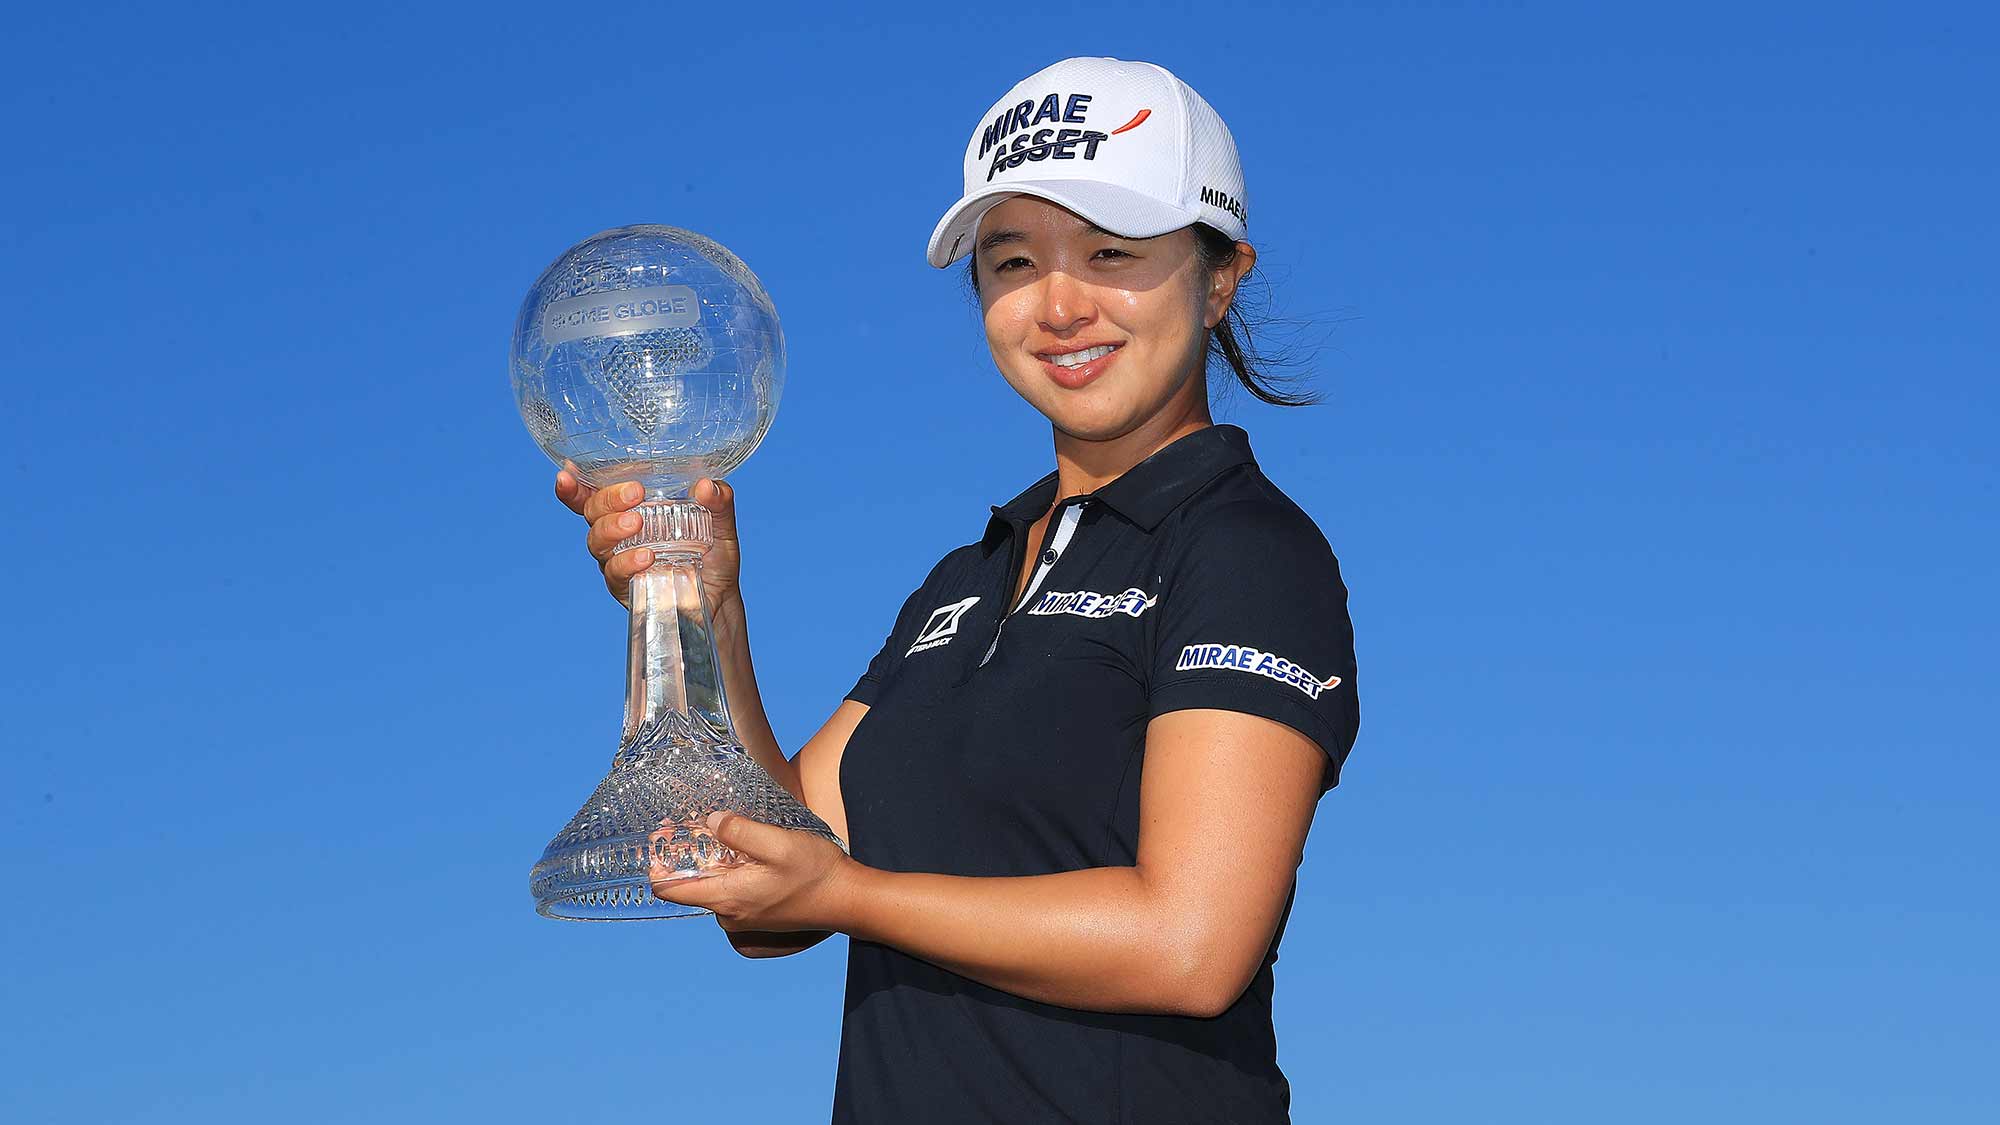  Sei Young Kim of South Korea poses with the trophy after winning the CME Group Tour Championship at Tiburon Golf Club on November 24, 2019 in Naples, Florida